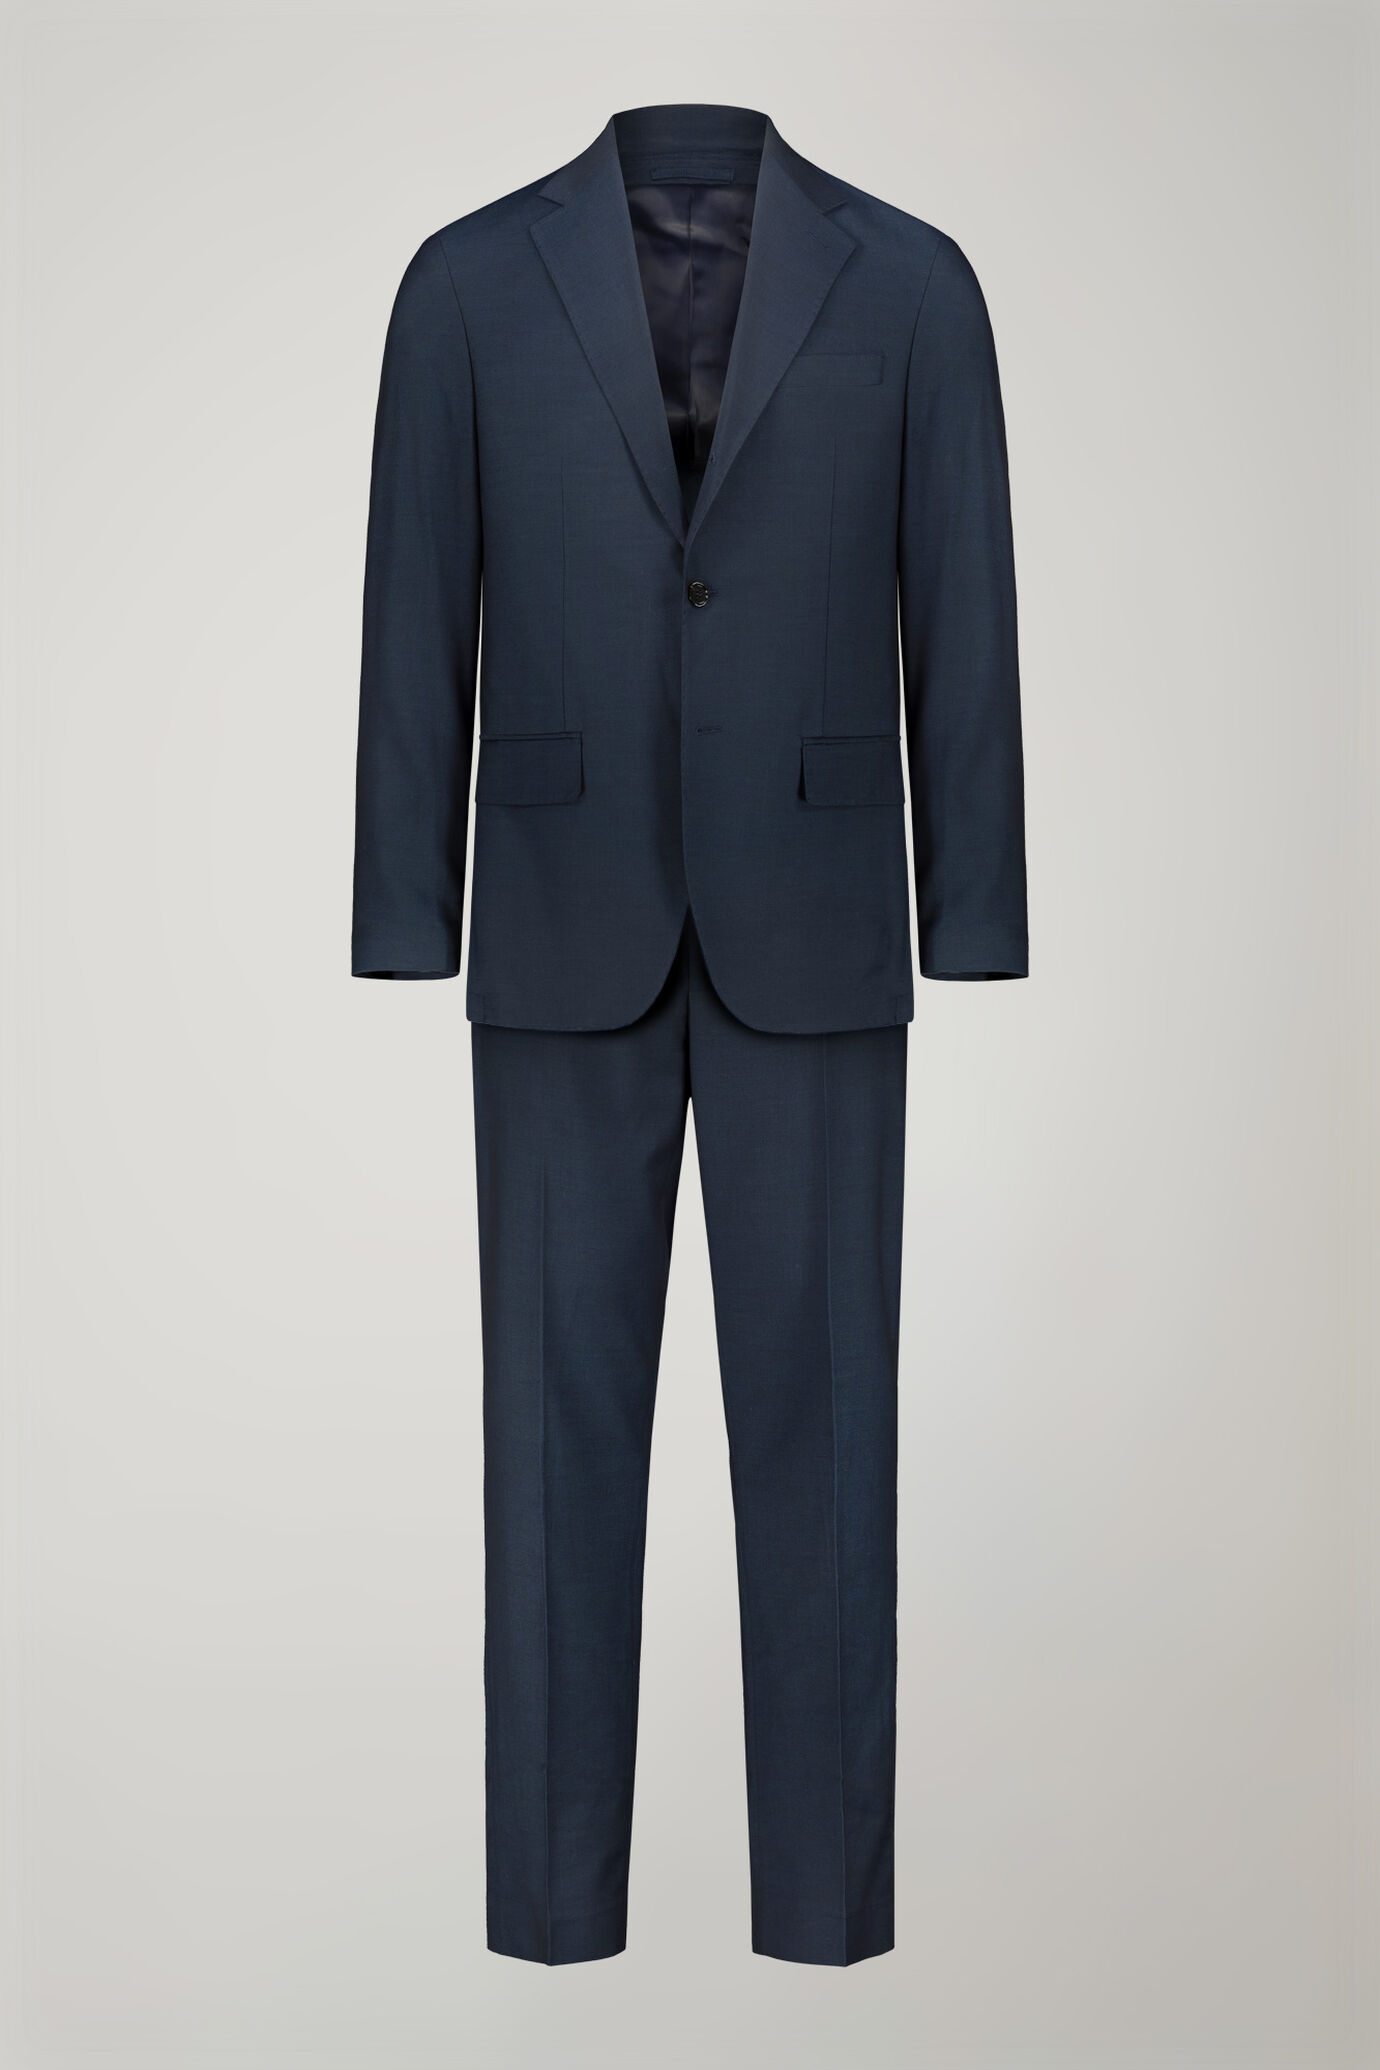 Men's single-breasted suit with regular fit partridge eye design image number 9